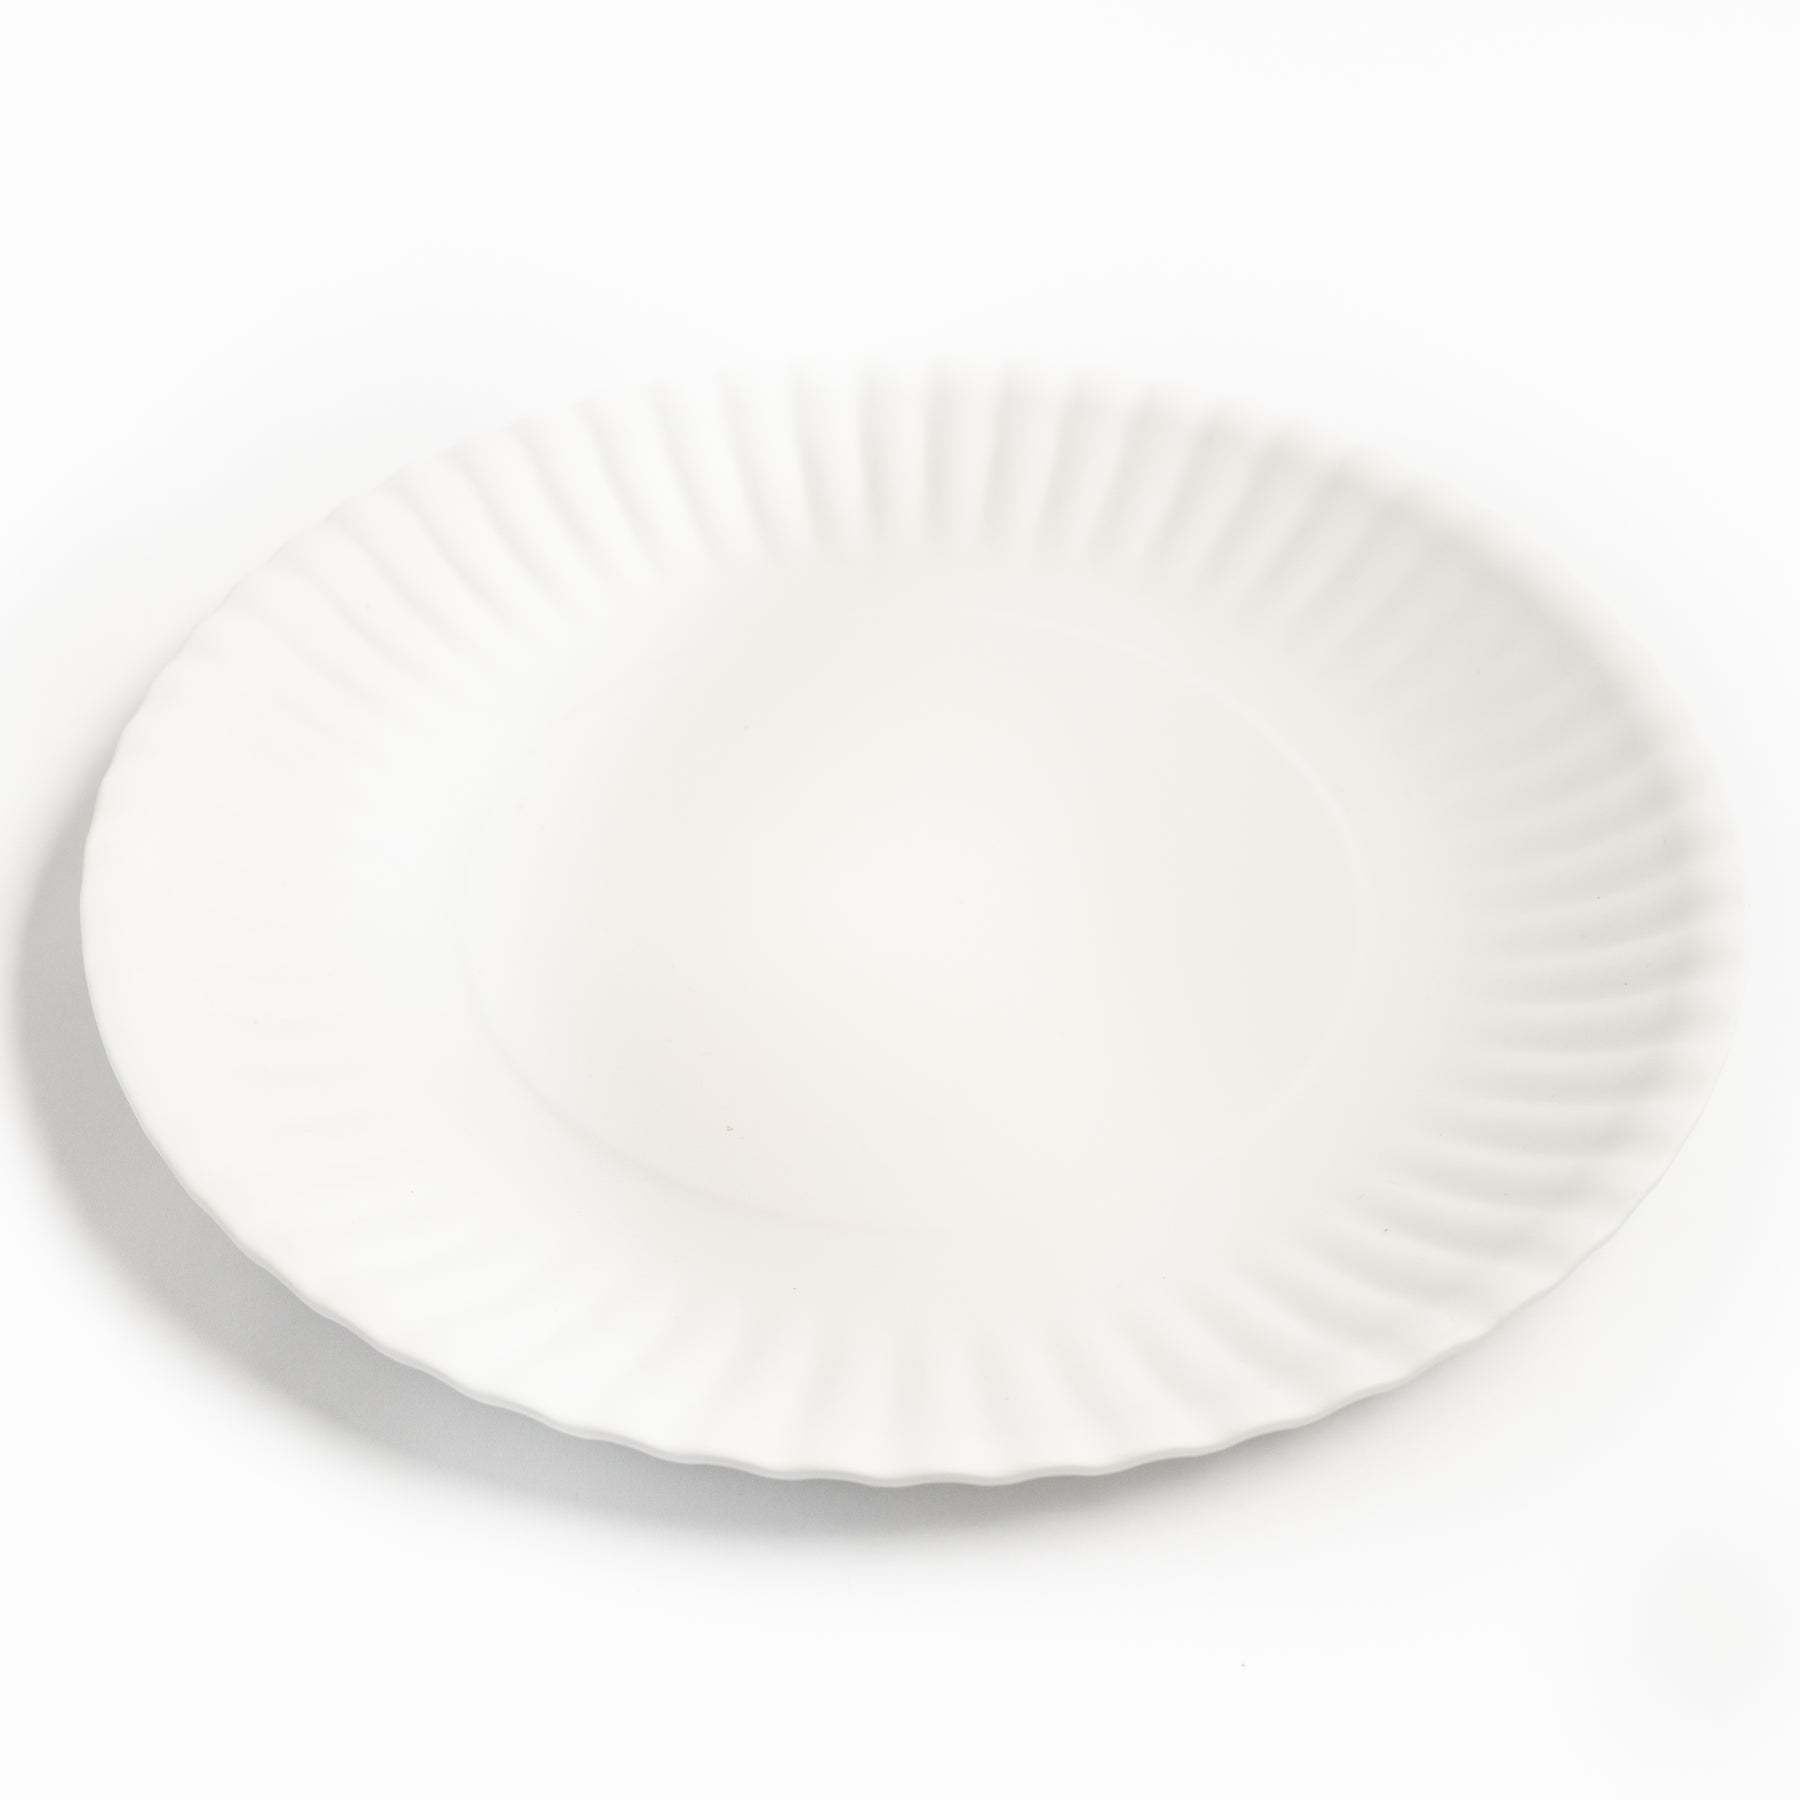  Upper Midland Products Small Paper Plates 4 Inch - 4